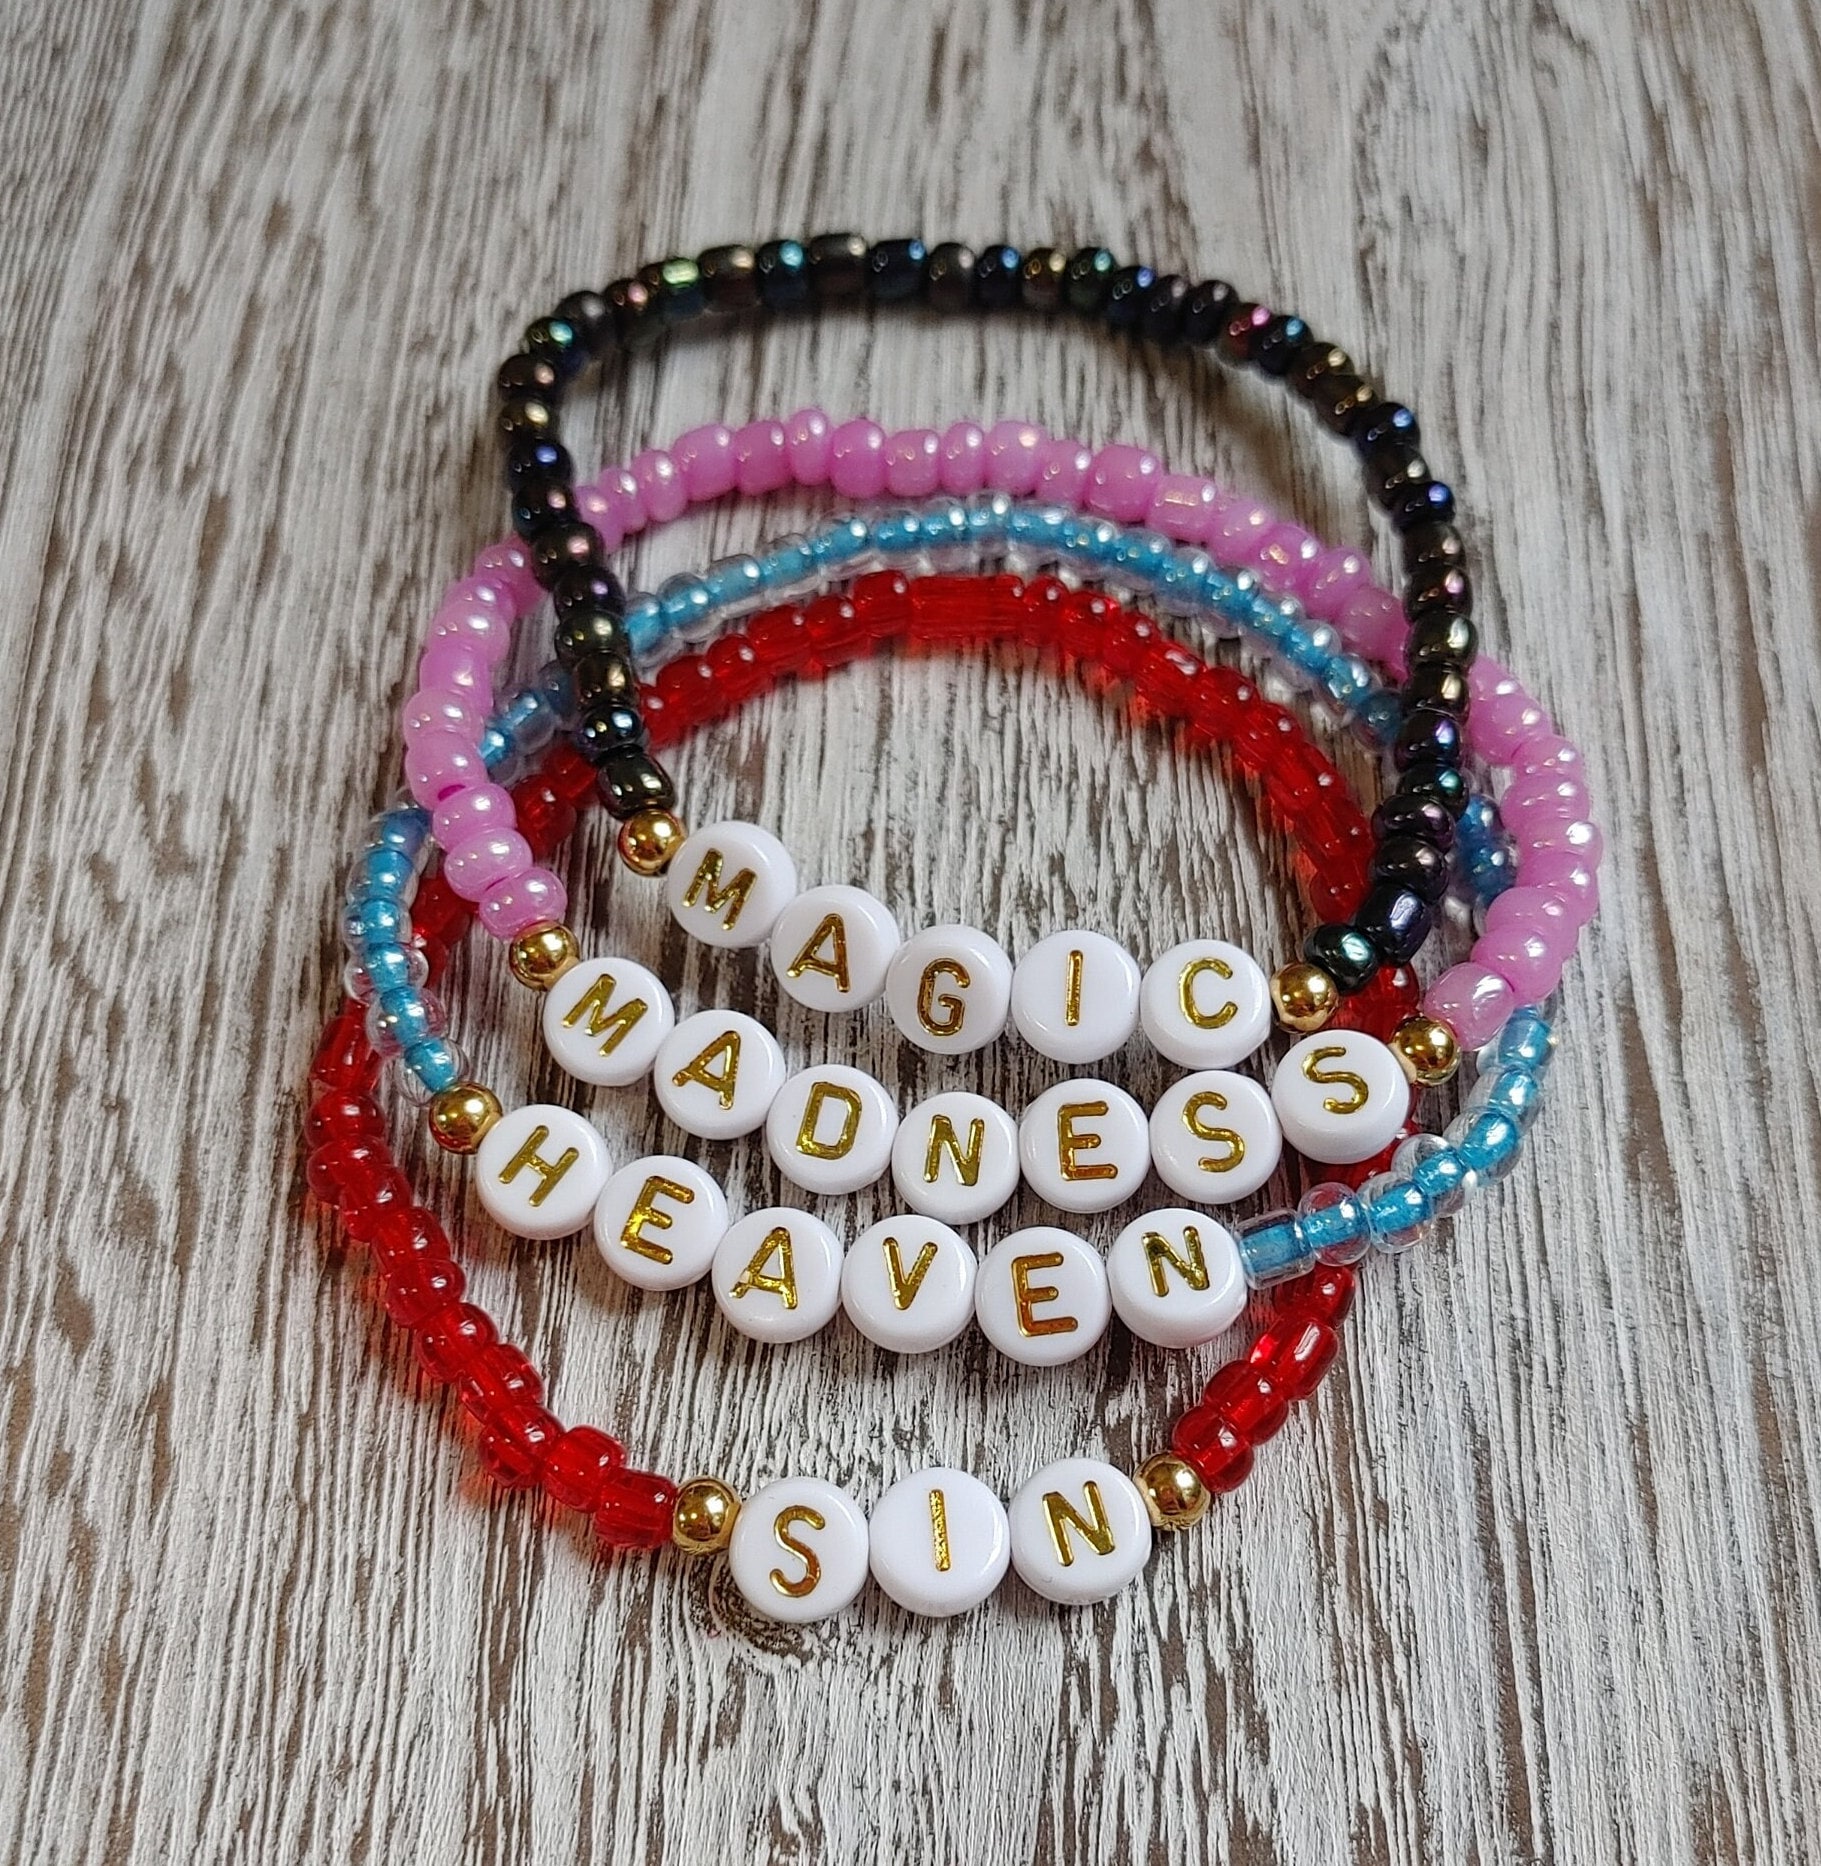 The Deeper Meaning of Taylor Swift's Eras Tour Friendship Bracelets for  Women- Motherly